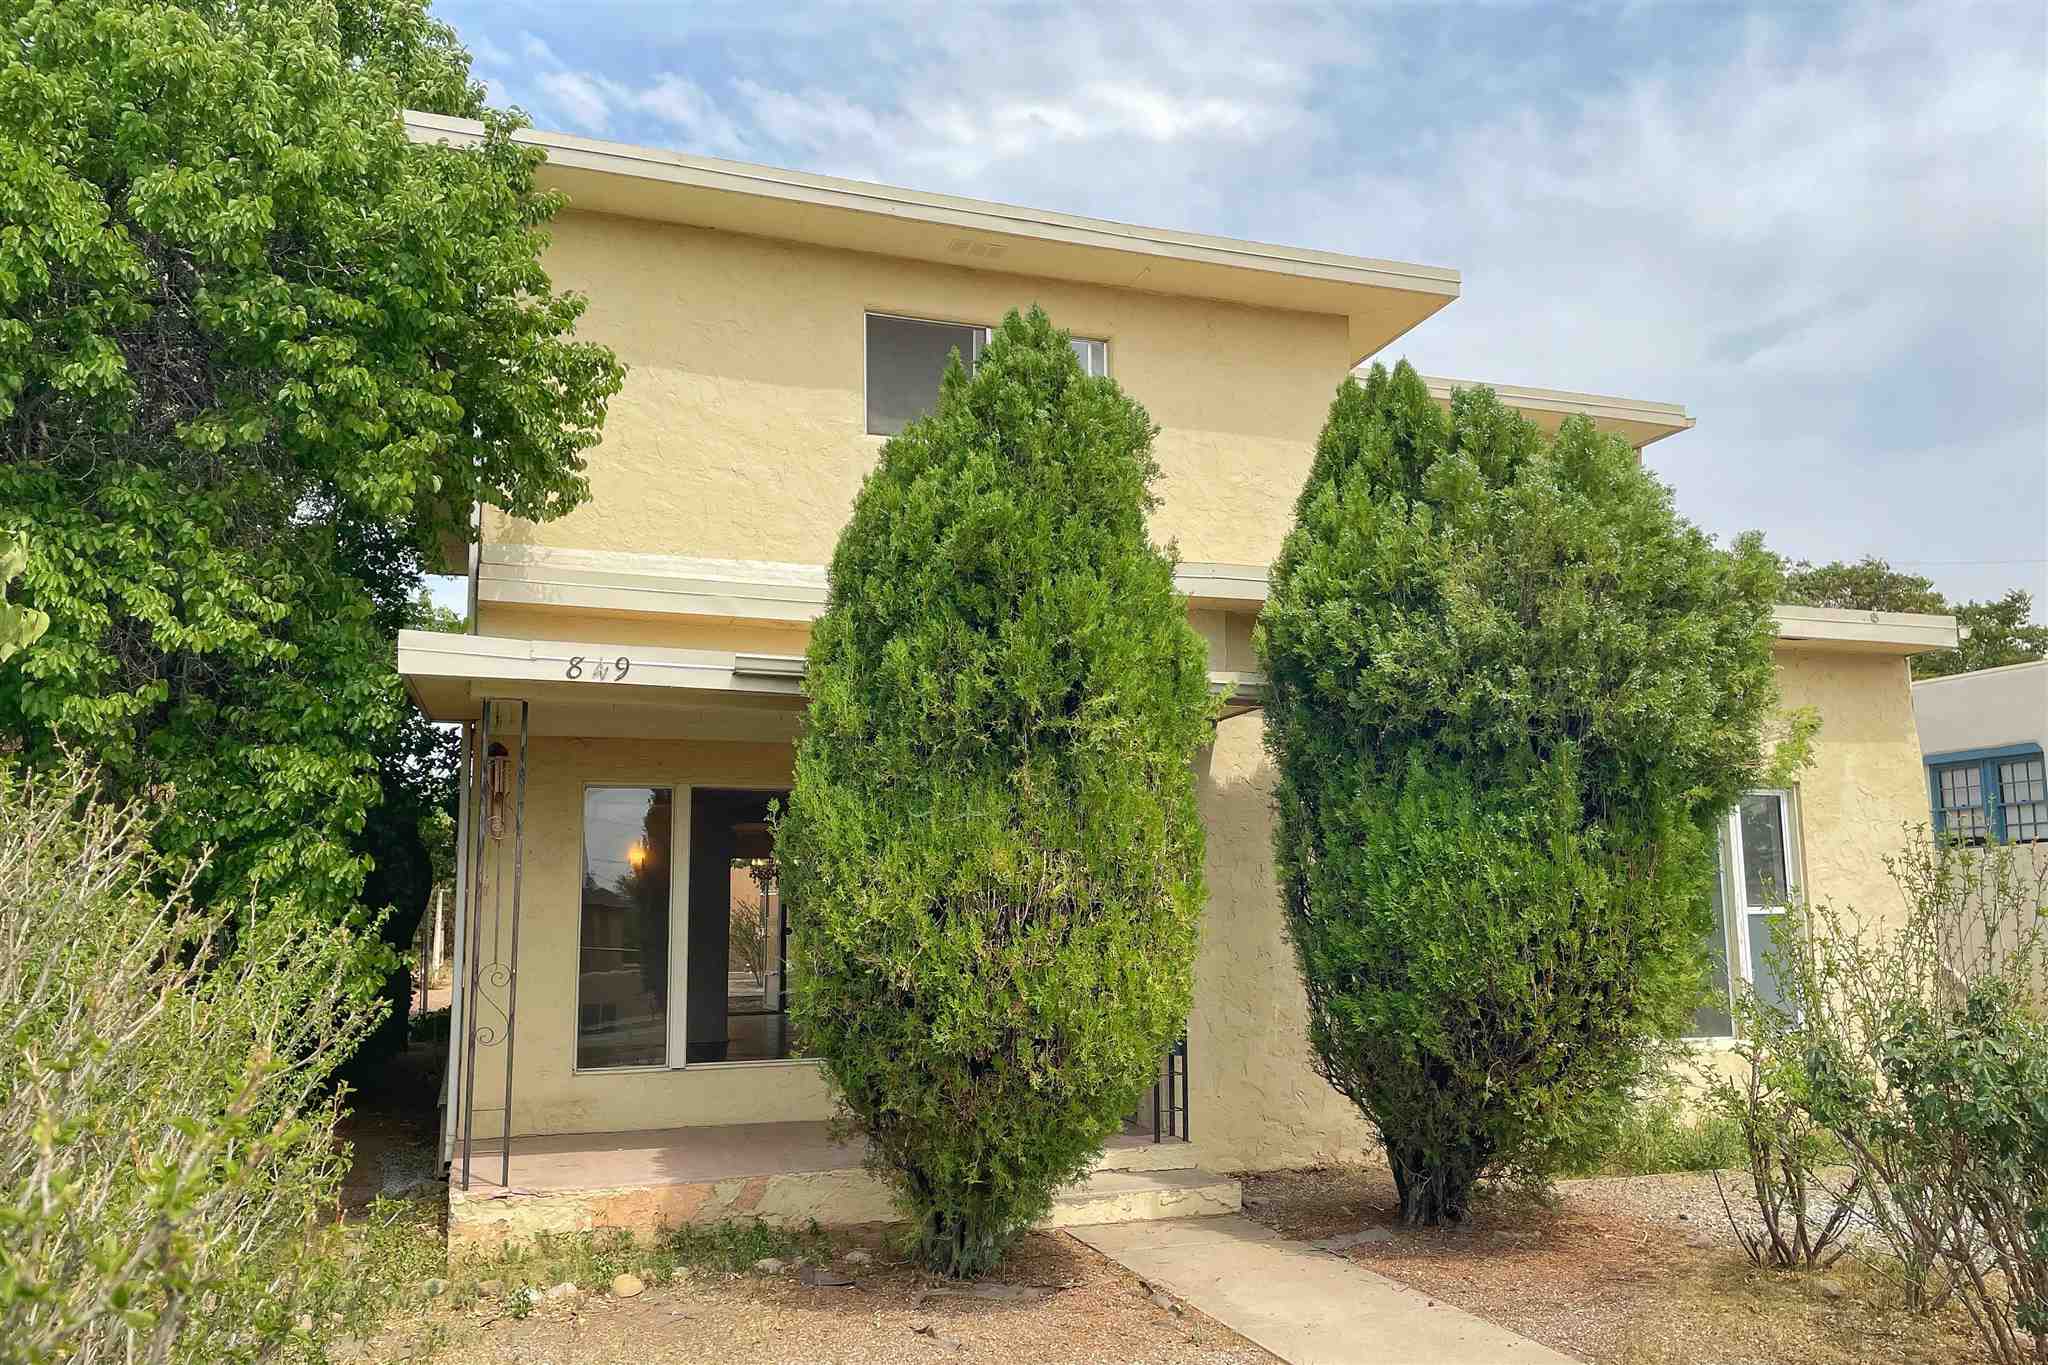 849 Don Diego, Santa Fe, New Mexico 87505, 4 Bedrooms Bedrooms, ,3 BathroomsBathrooms,Residential,For Sale,849 Don Diego,202102729